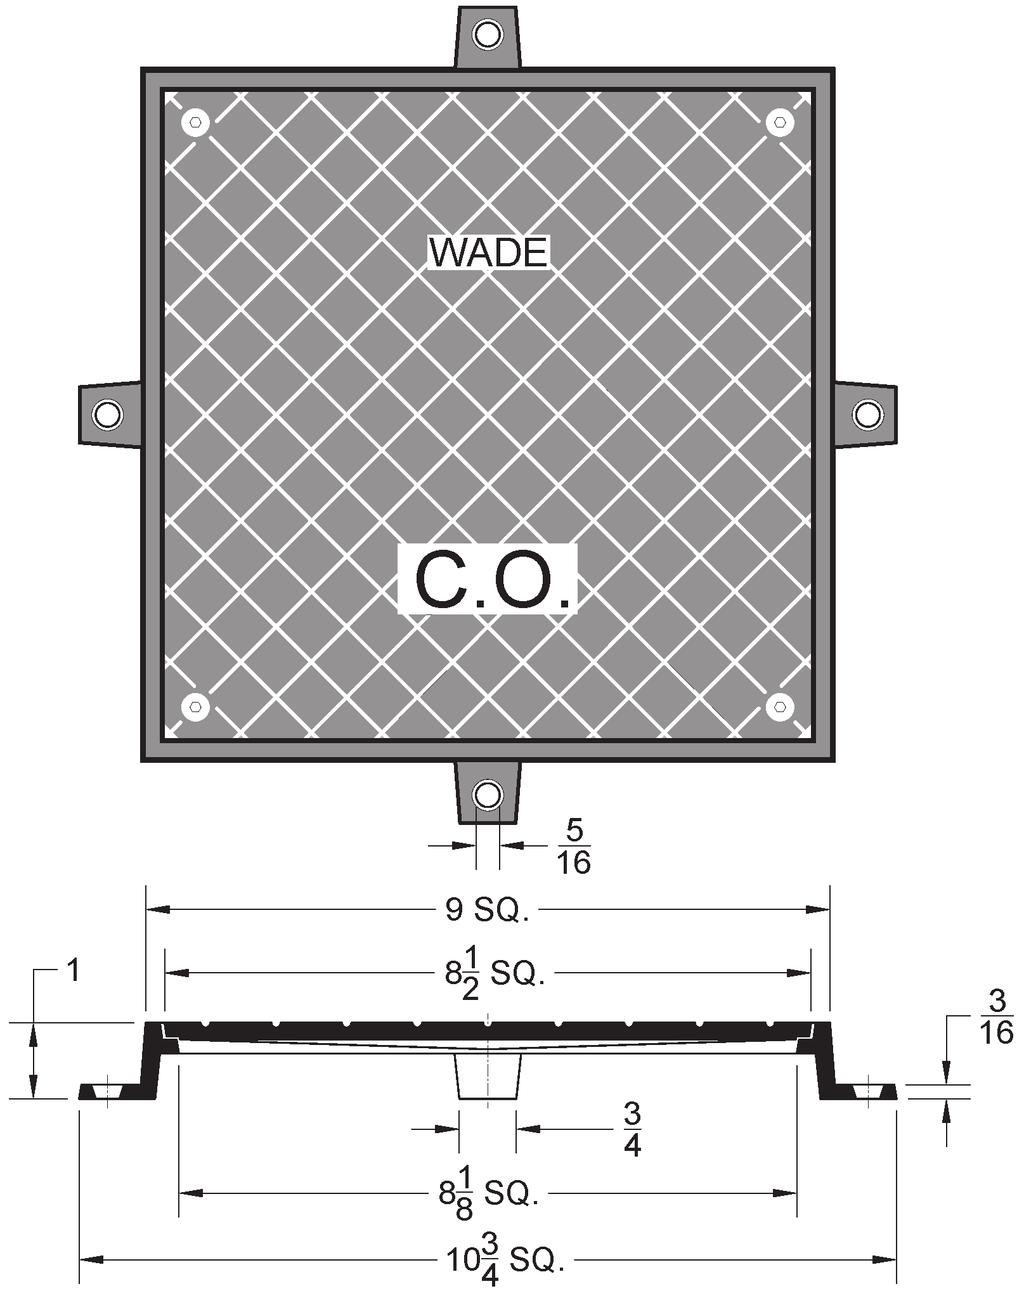 8301 Square Cleanout Access ASME Load Rating () Nickel Bronze Light Duty (-2) Satin Bronze Light Duty 8301-9 Nickel Bronze Top Regularly Furnished: Square, scoriated cleanout access cover